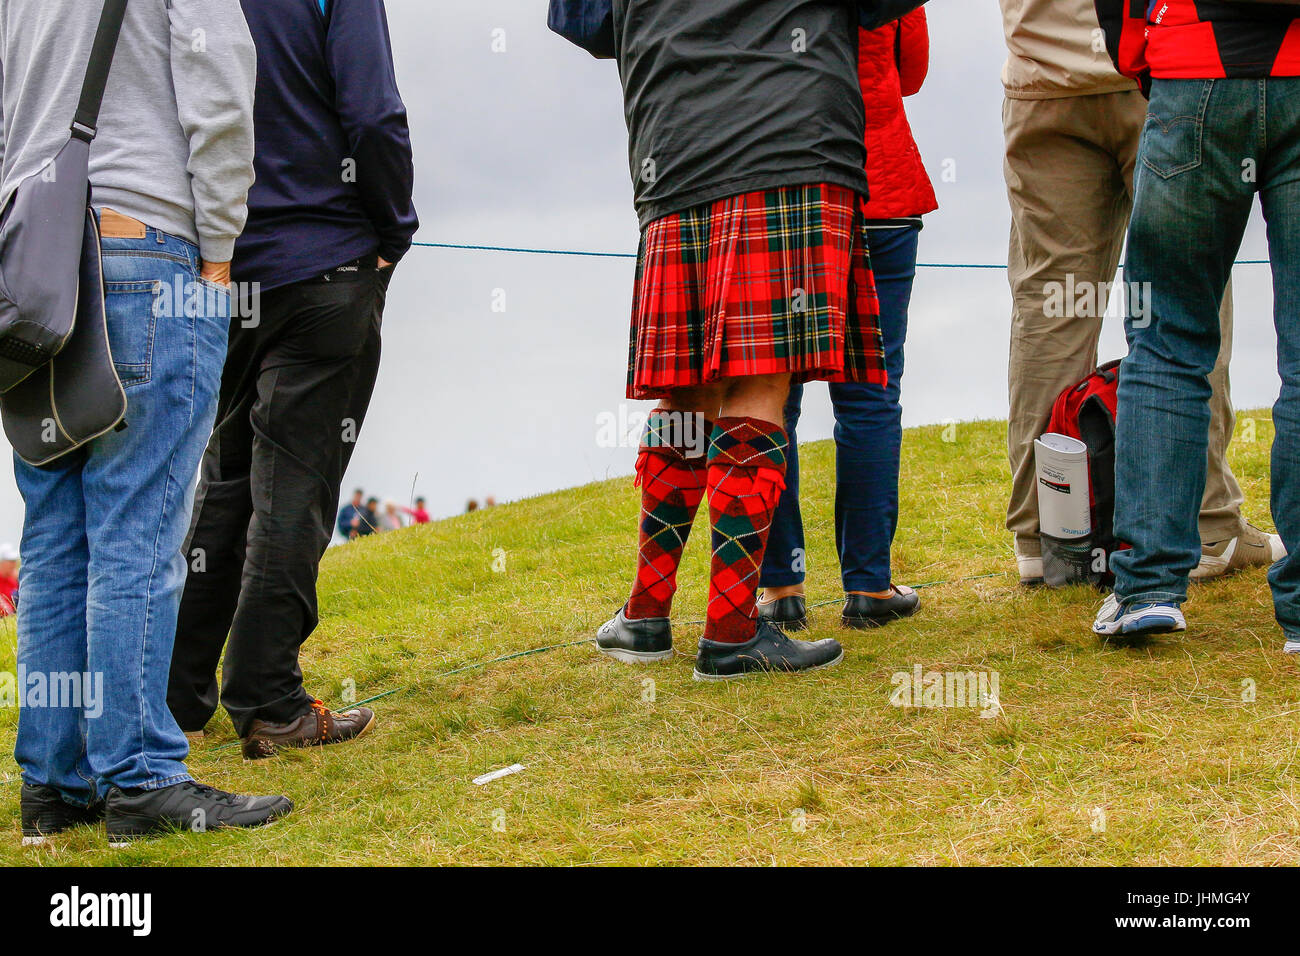 Irvine, Scotland, UK. 14th July, 2017. The organisers of The Scottish Open Golf championship declared the second day to be 'Tartan Day' and asked members of the public, officials and players to wear something tartan if possible. Some agreed to the request. Credit: Findlay/Alamy Live News Stock Photo